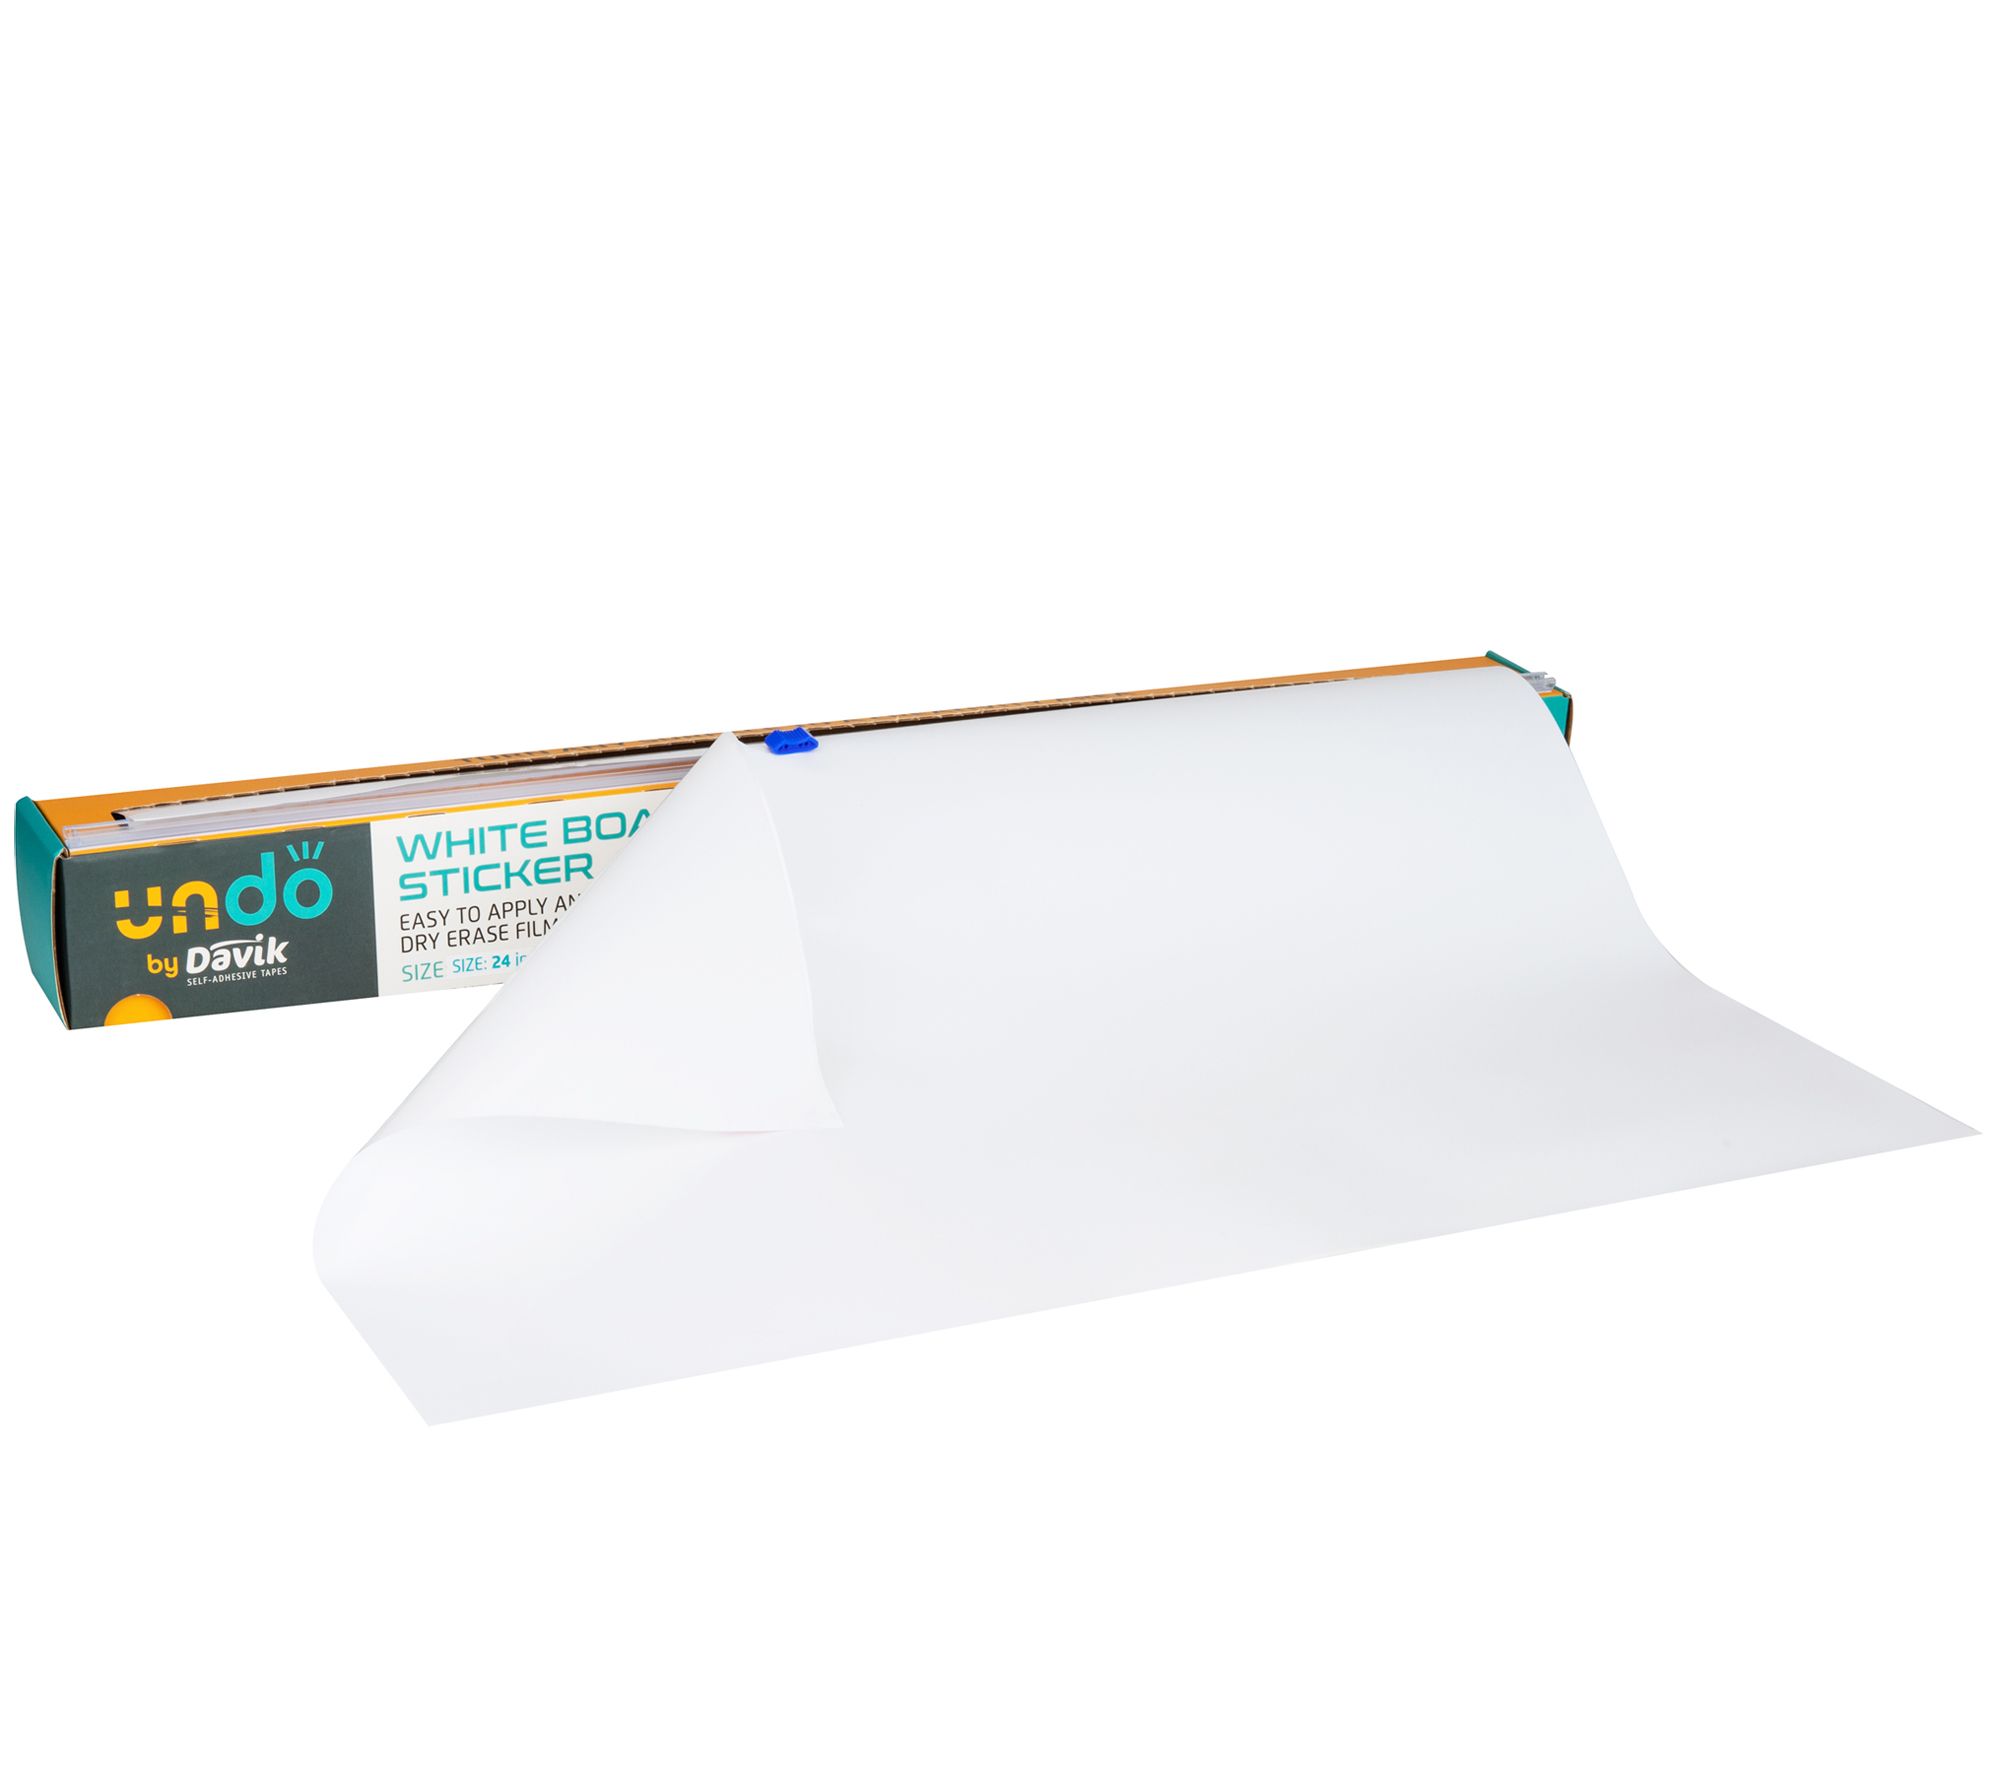 Mind Reader Adhesive Whiteboard Paper & 2 Dry Erase Markers